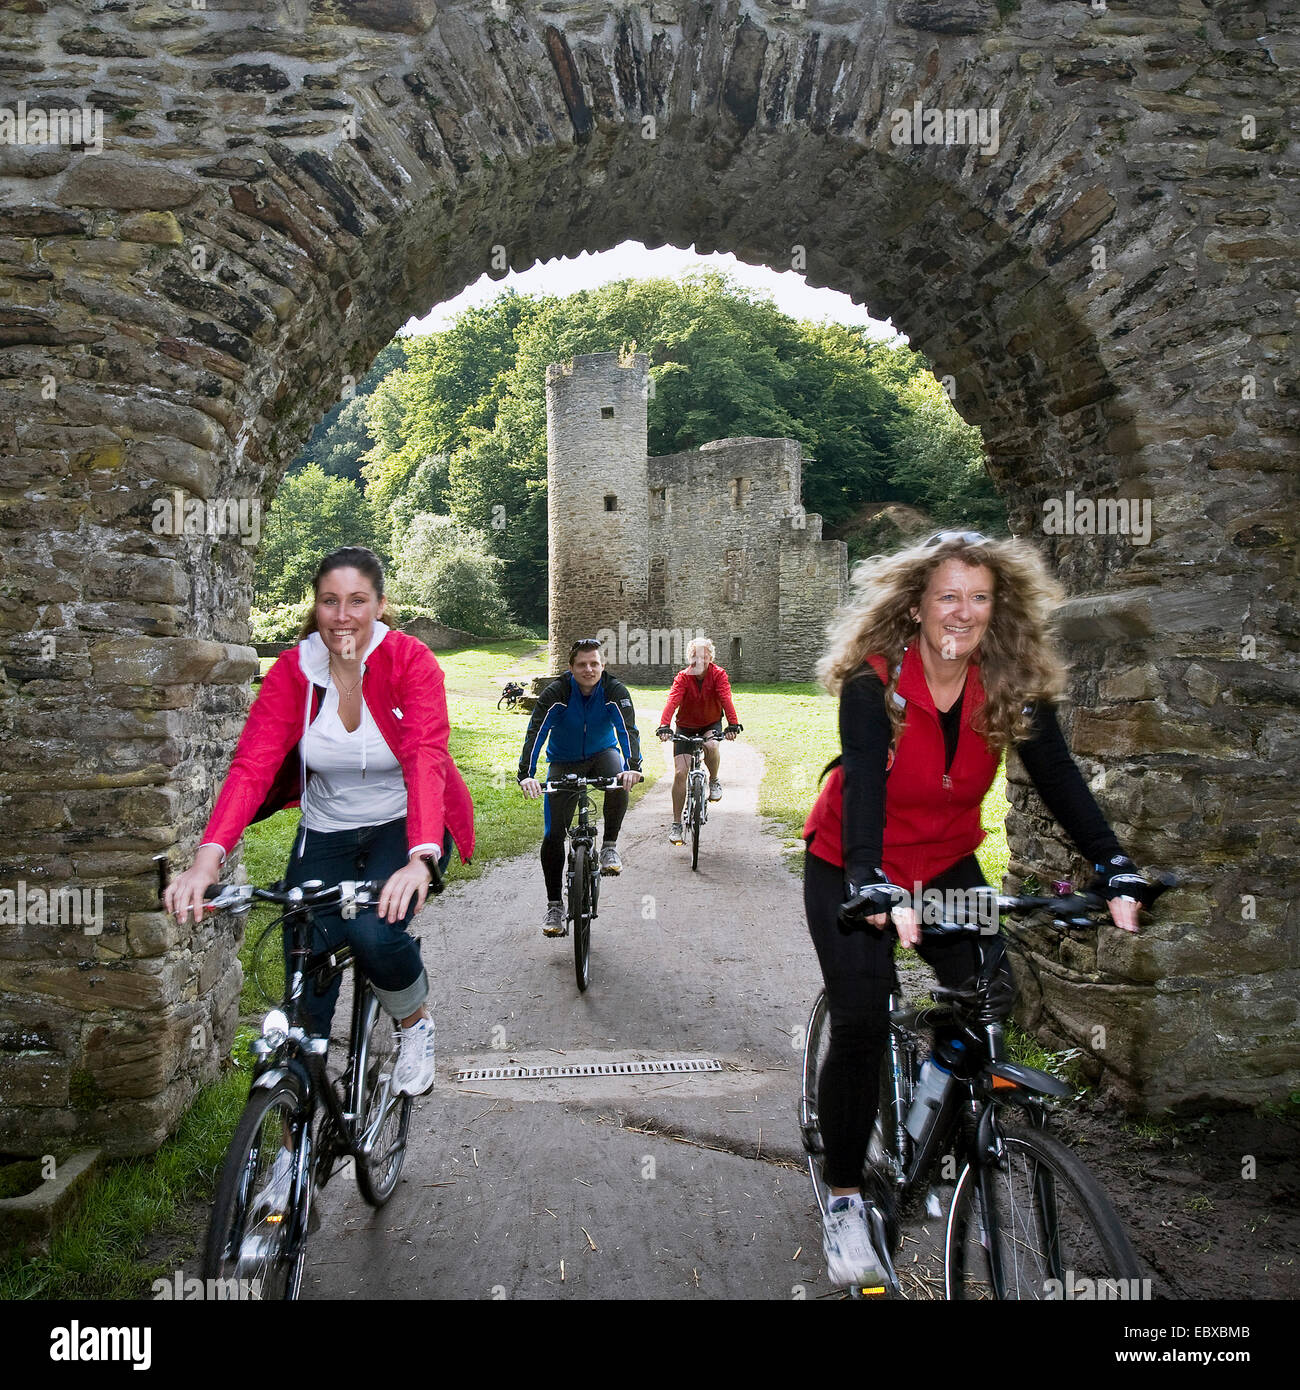 bicyclists crossing a archway at Hardenstein Castle ruin, Germany, North Rhine-Westphalia, Ruhr Area, Witten Stock Photo